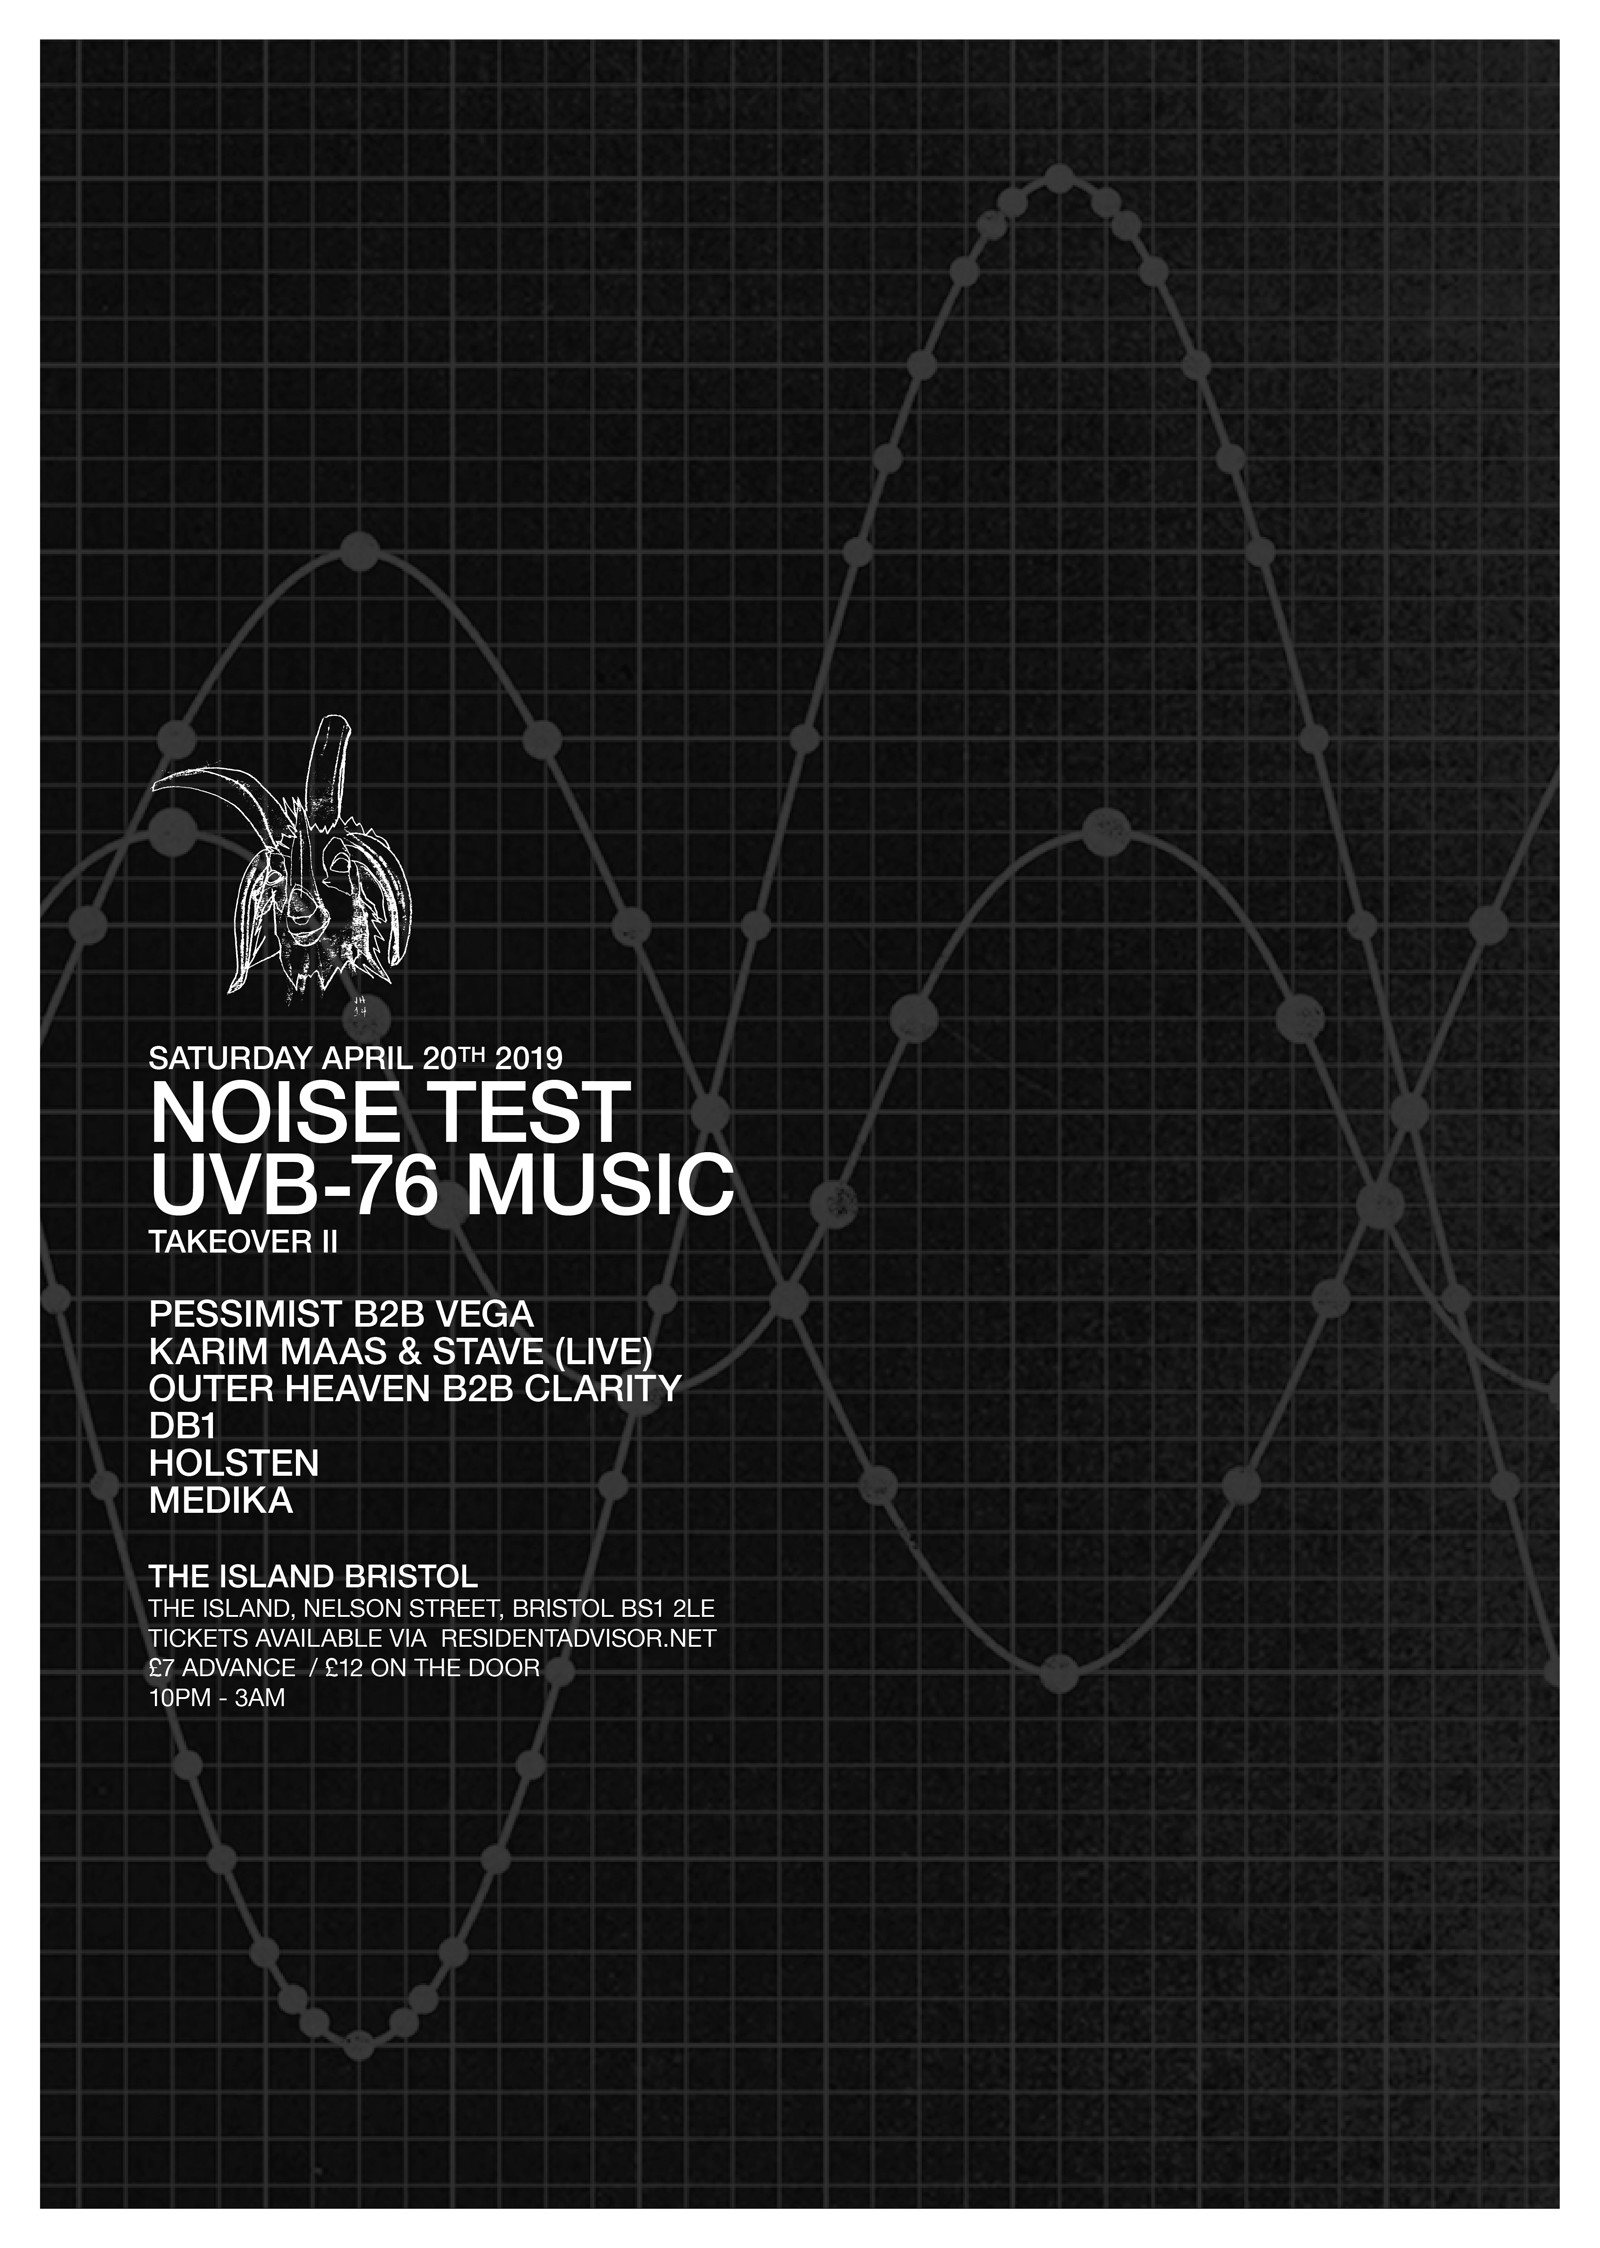 Noise Test: UVB-76 Music Takeover II at The Island